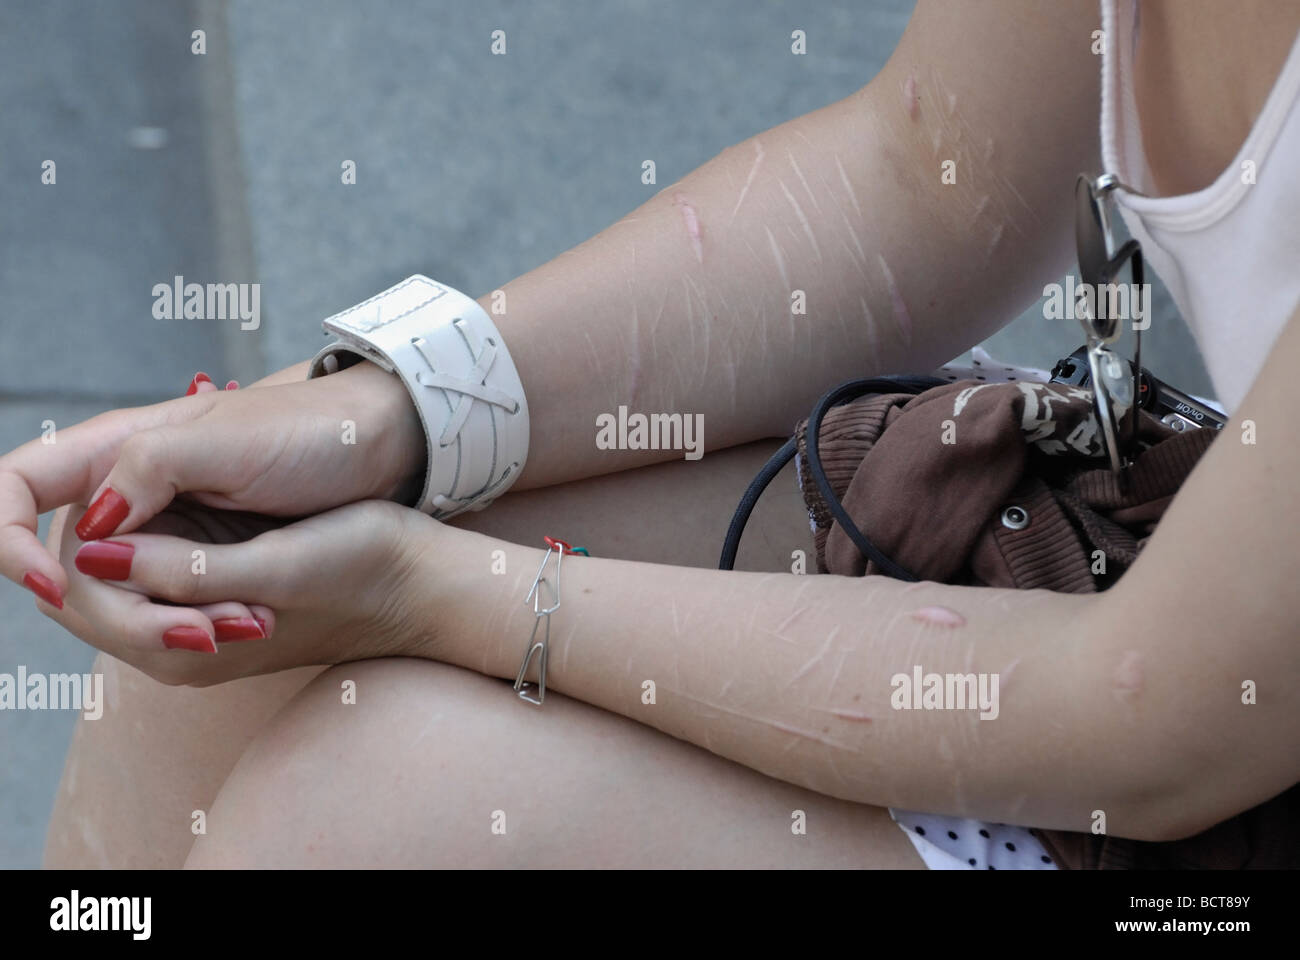 Young girl with many scars on hands Stock Photo